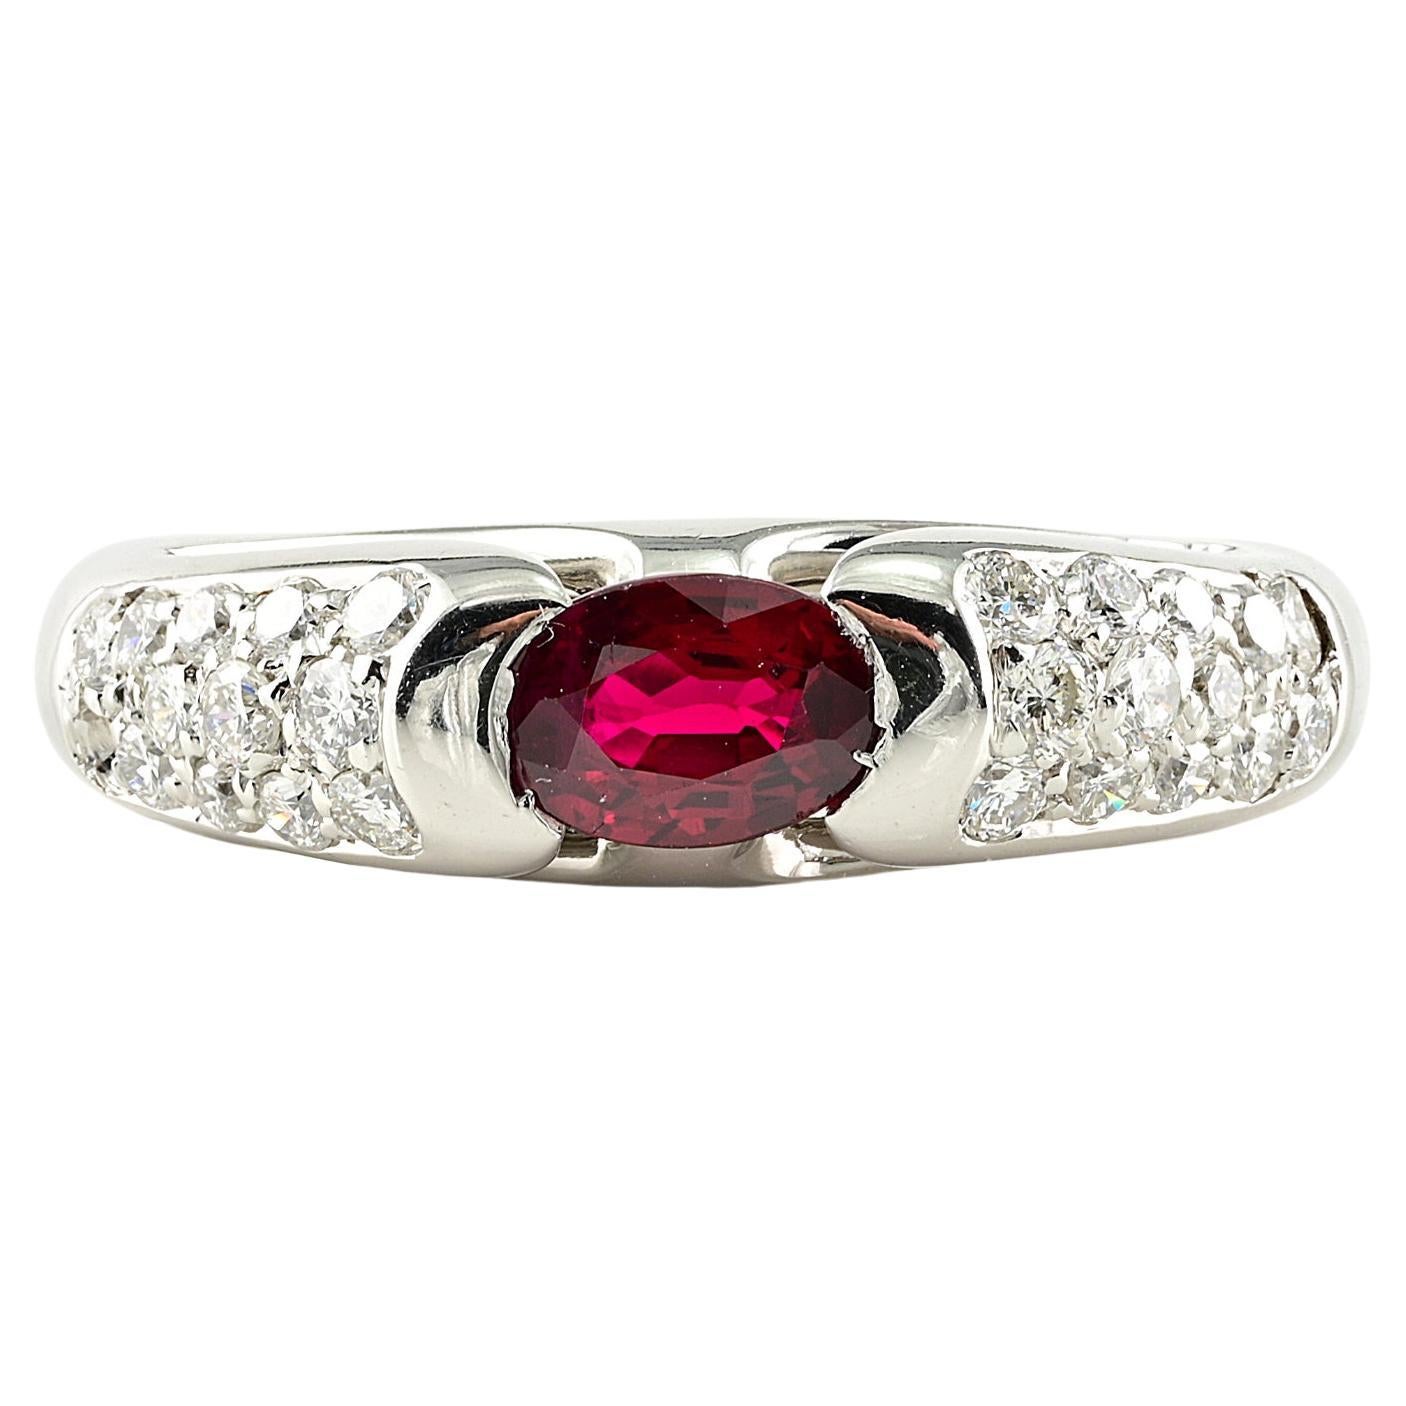 Iconic Bvlgari Ruby Diamond 18KT Ring 1980 For Sale